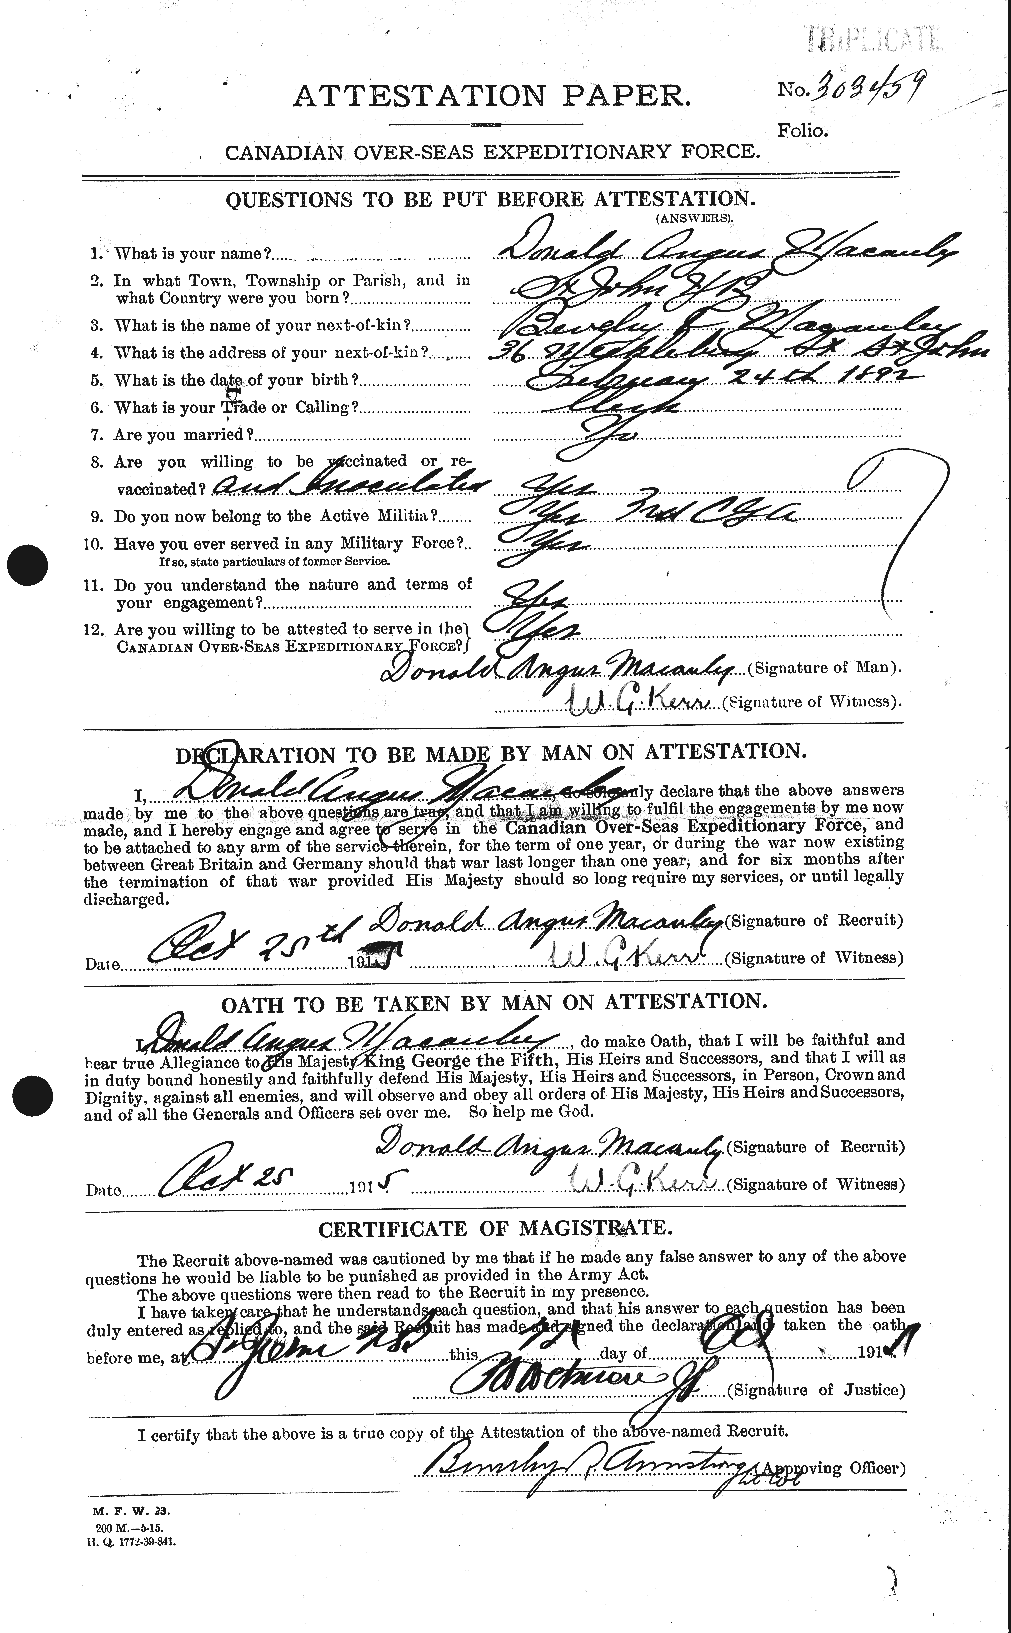 Personnel Records of the First World War - CEF 130351a